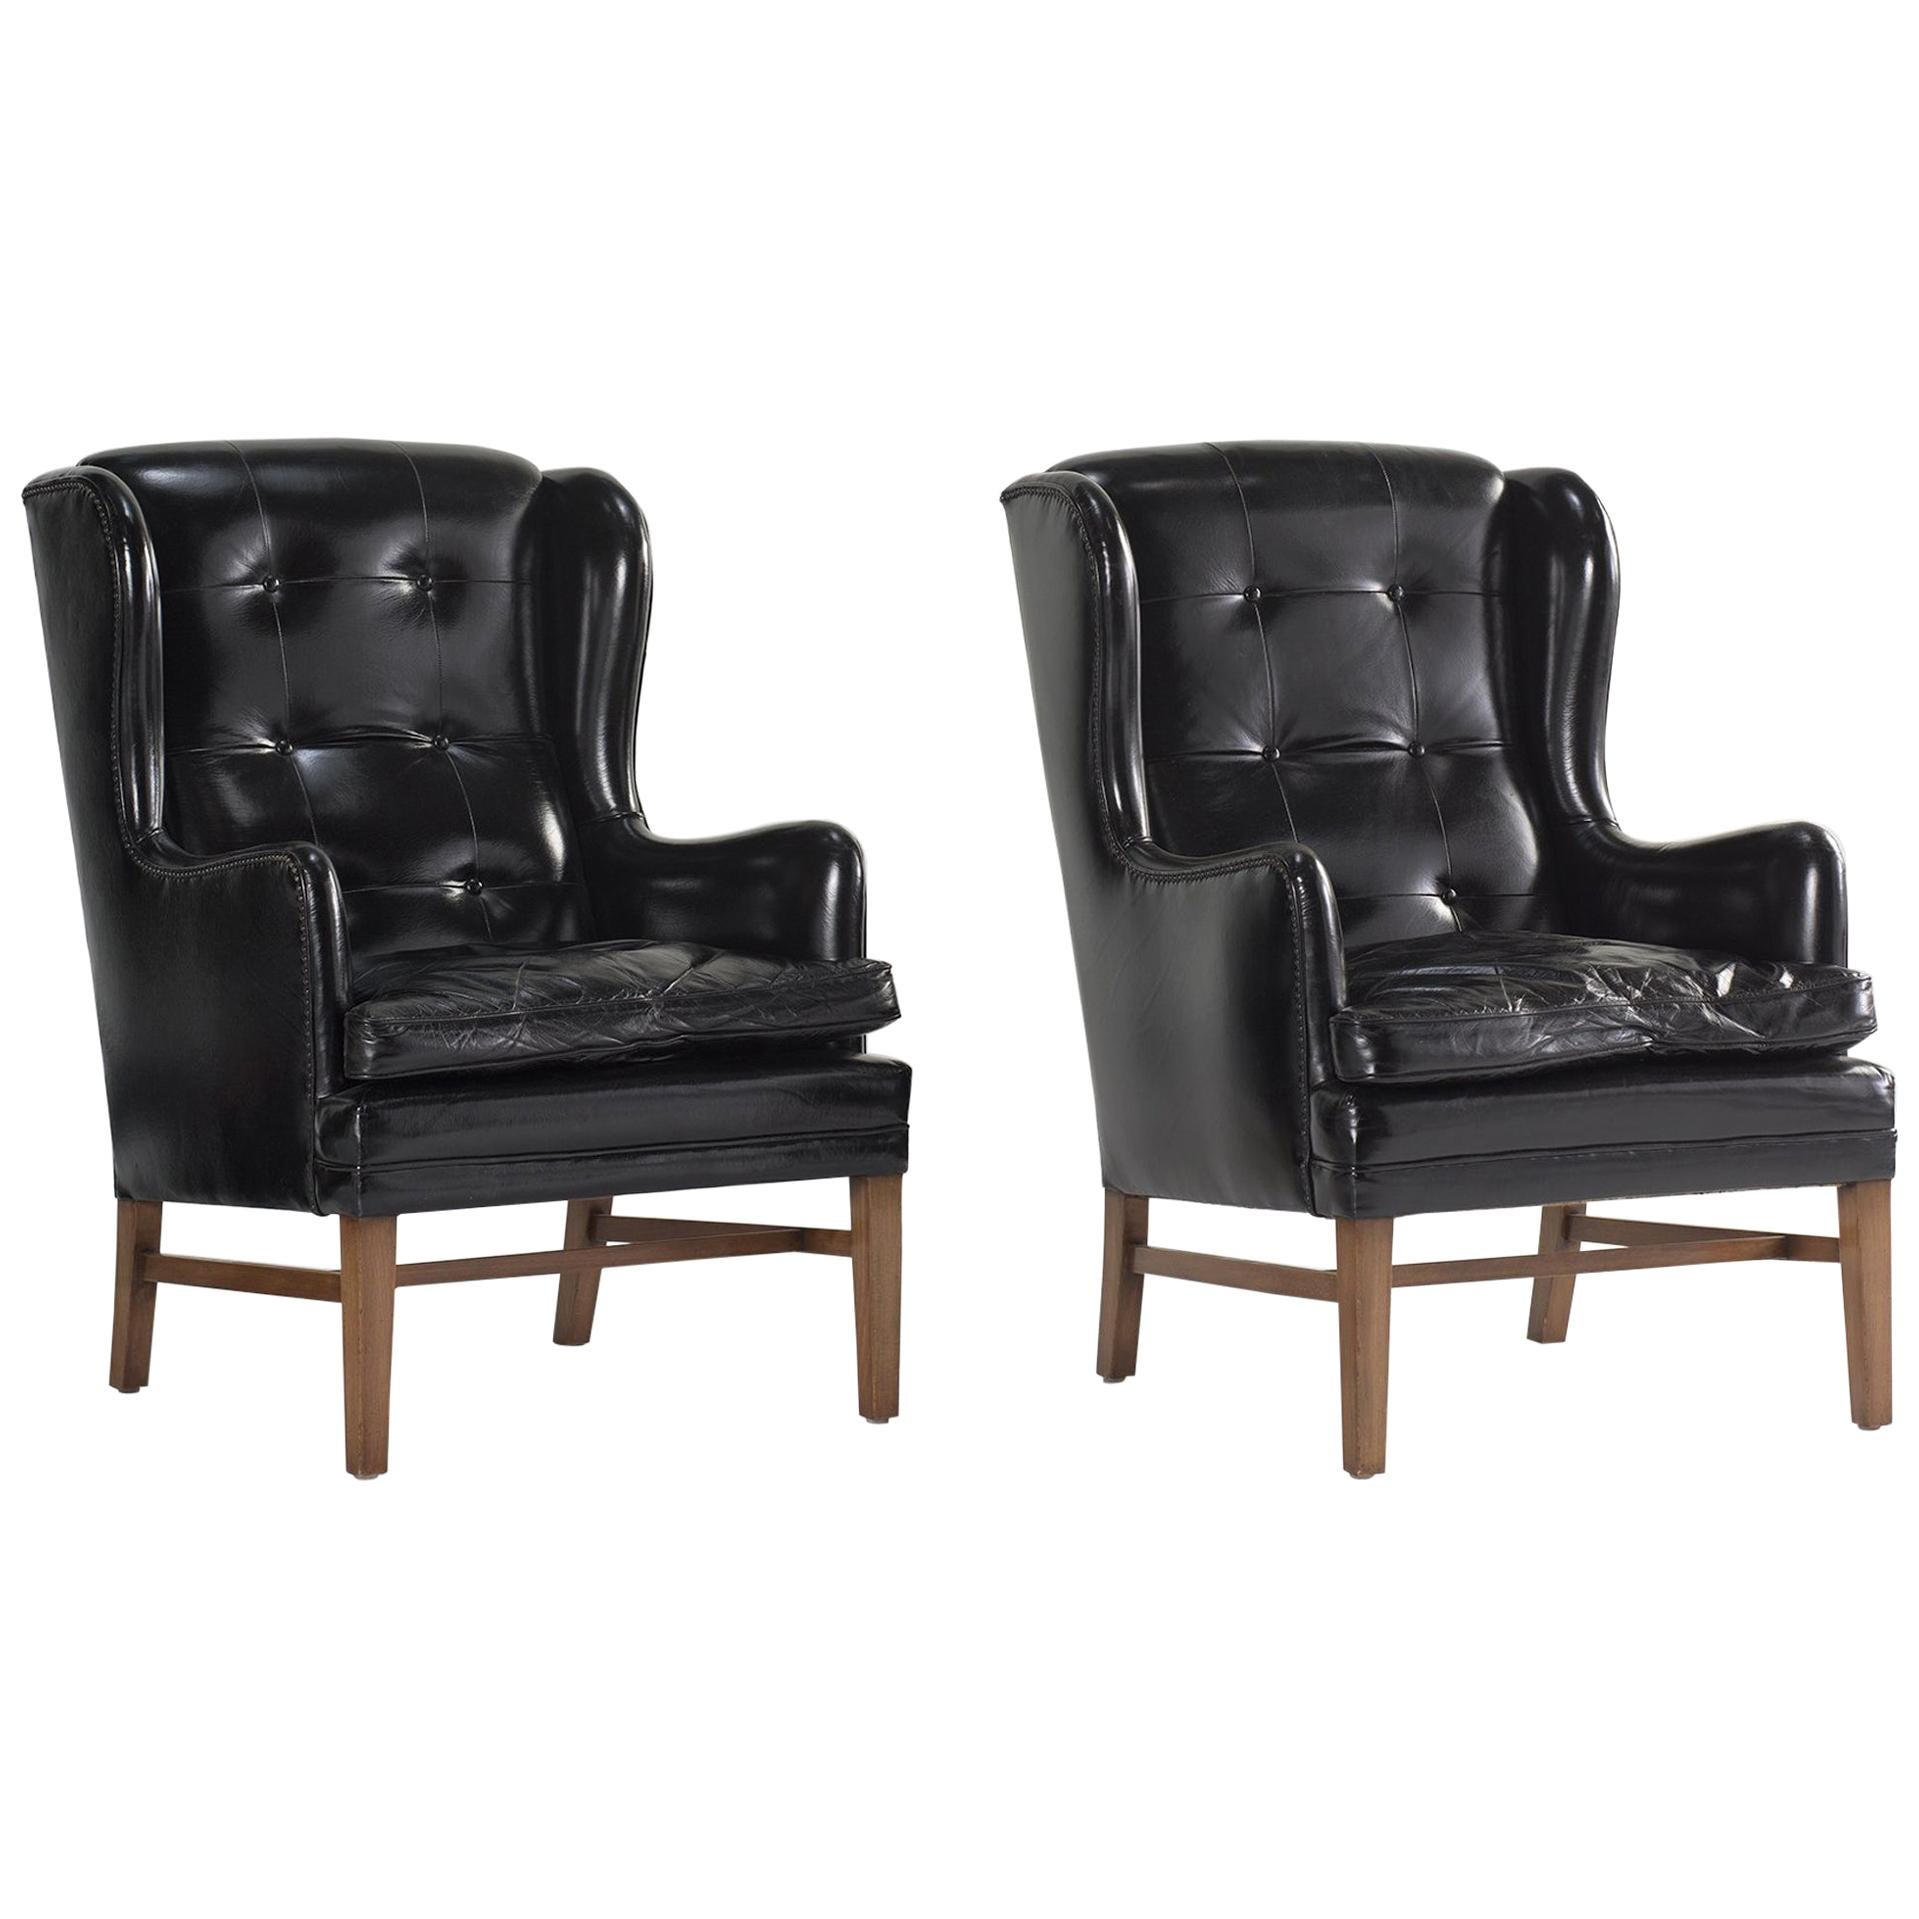 Black Leather Wing Armchairs, Sweden, circa 1950